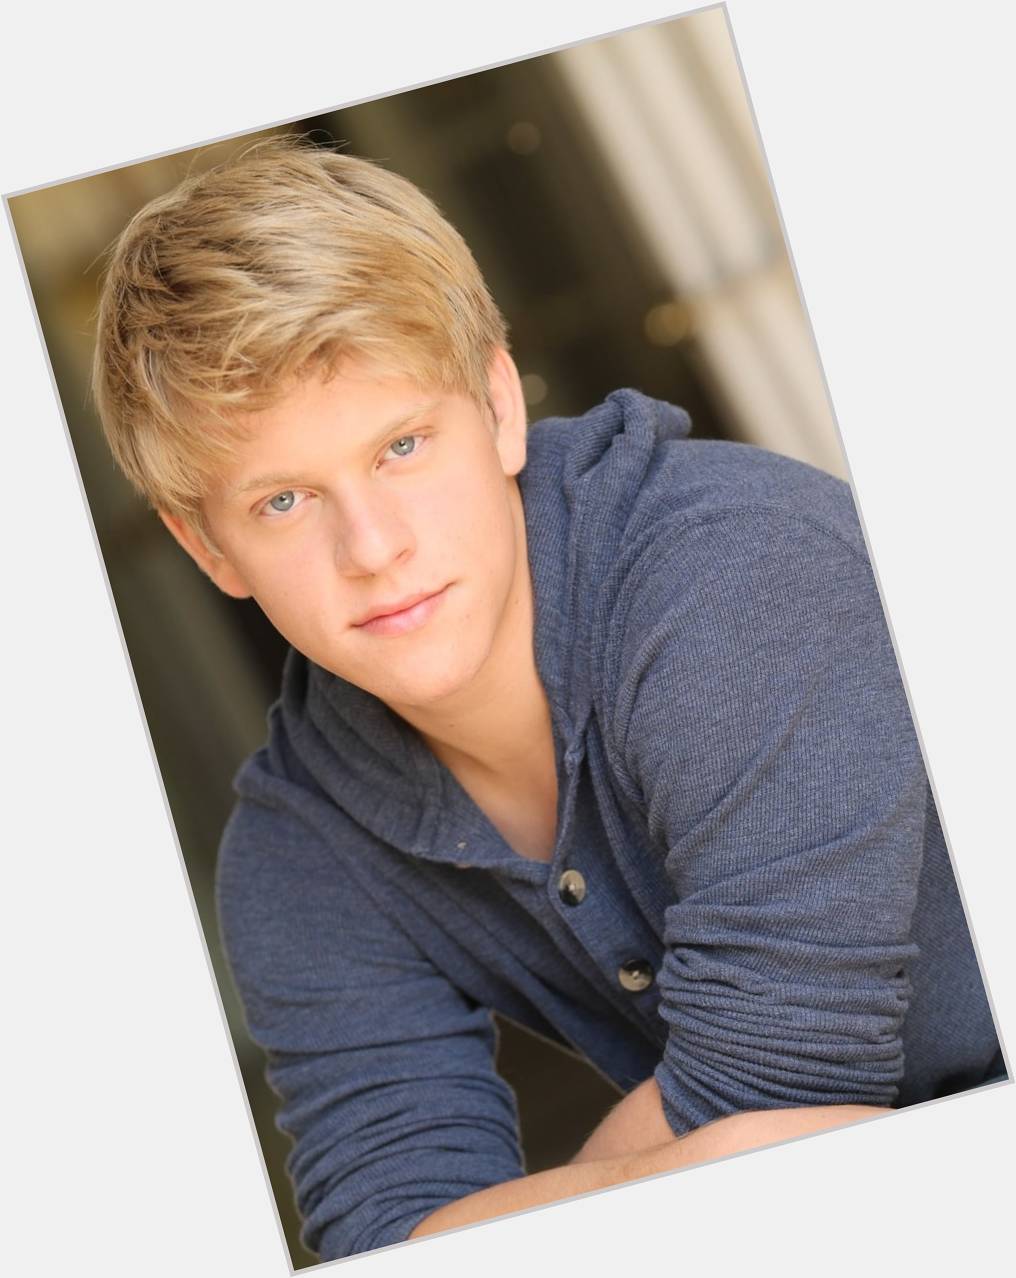 <a href="/hot-men/jackson-odell/where-dating-news-photos">Jackson Odell</a> Athletic body,  blonde hair & hairstyles